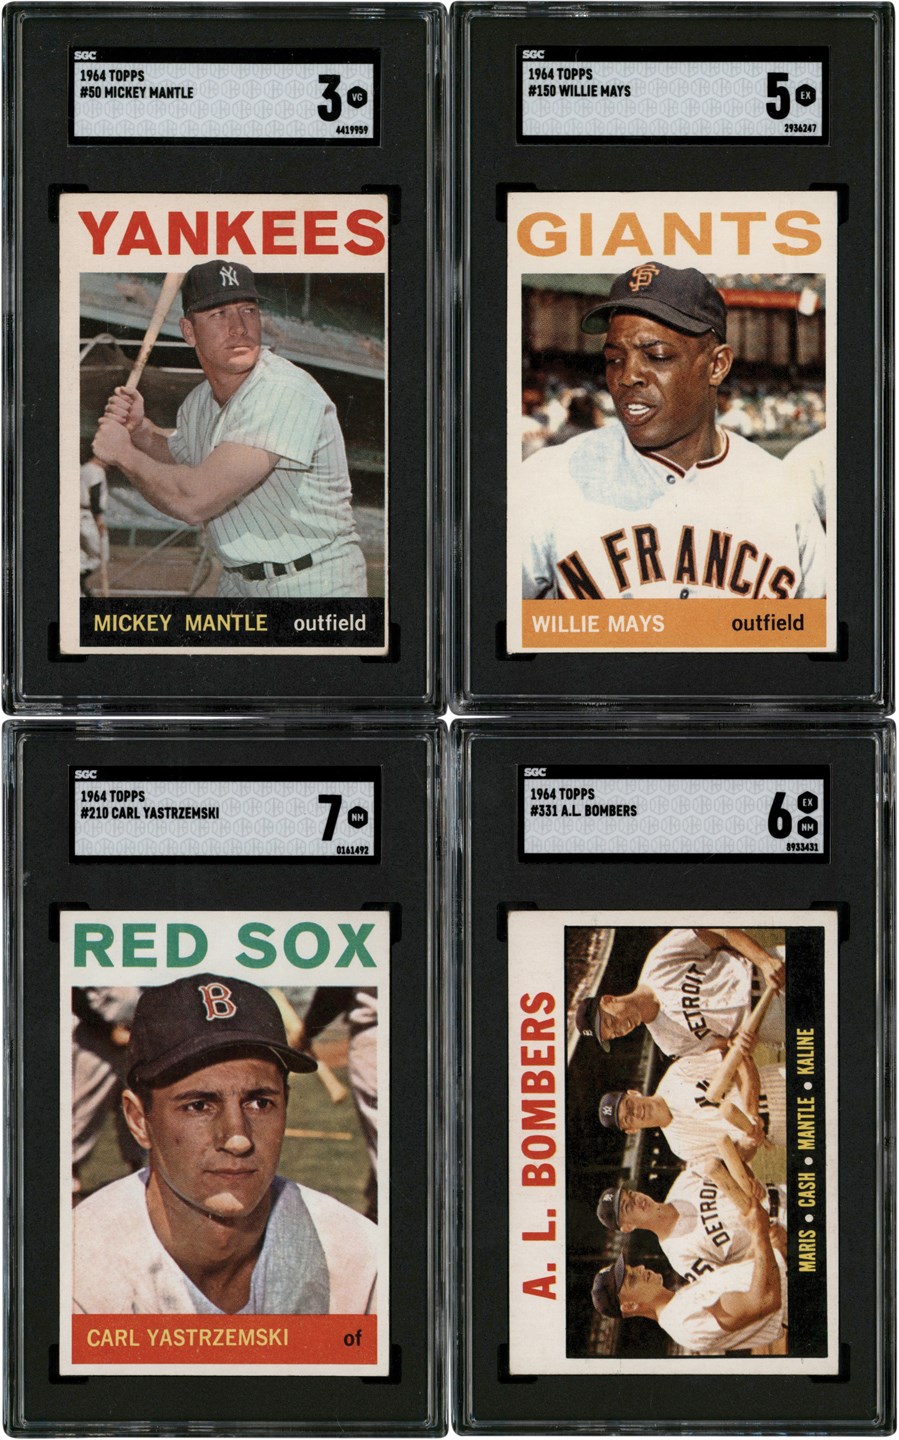 1964 Topps Complete Set w/SGC Mantle & Mays (587)